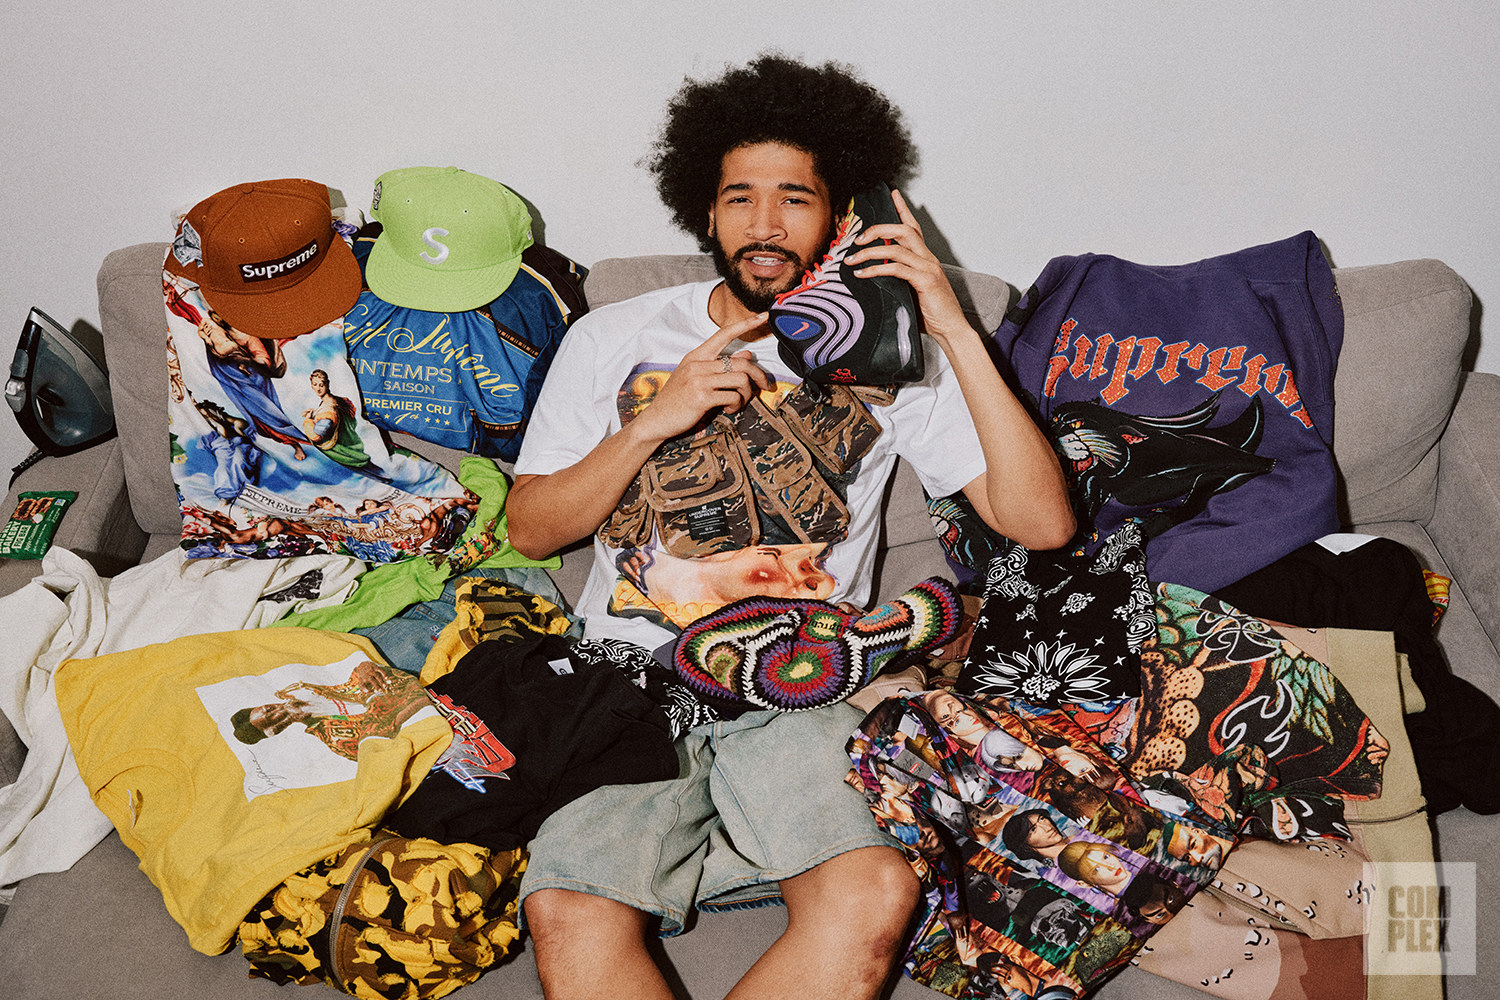 Christopher Chance with his Supreme collection.